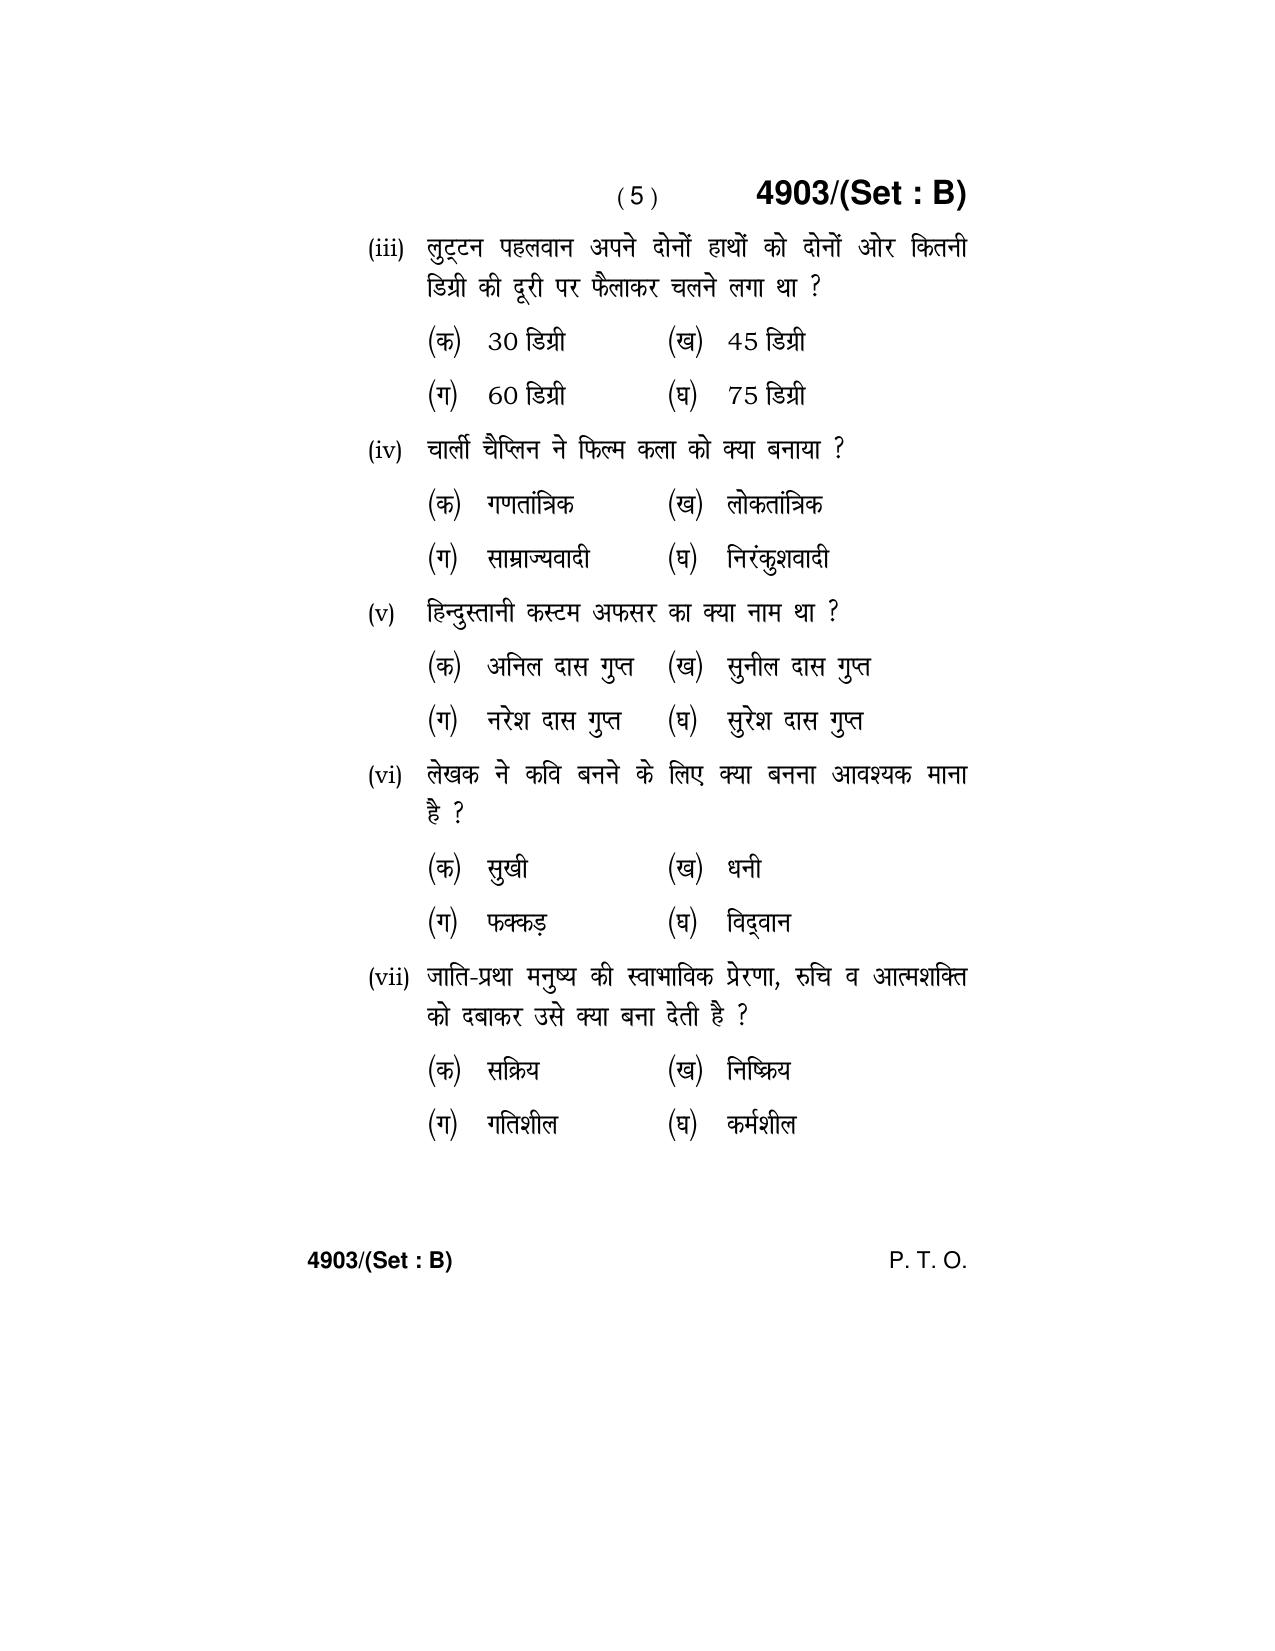 Haryana Board HBSE Class 12 Hindi Core 2020 Question Paper - Page 13